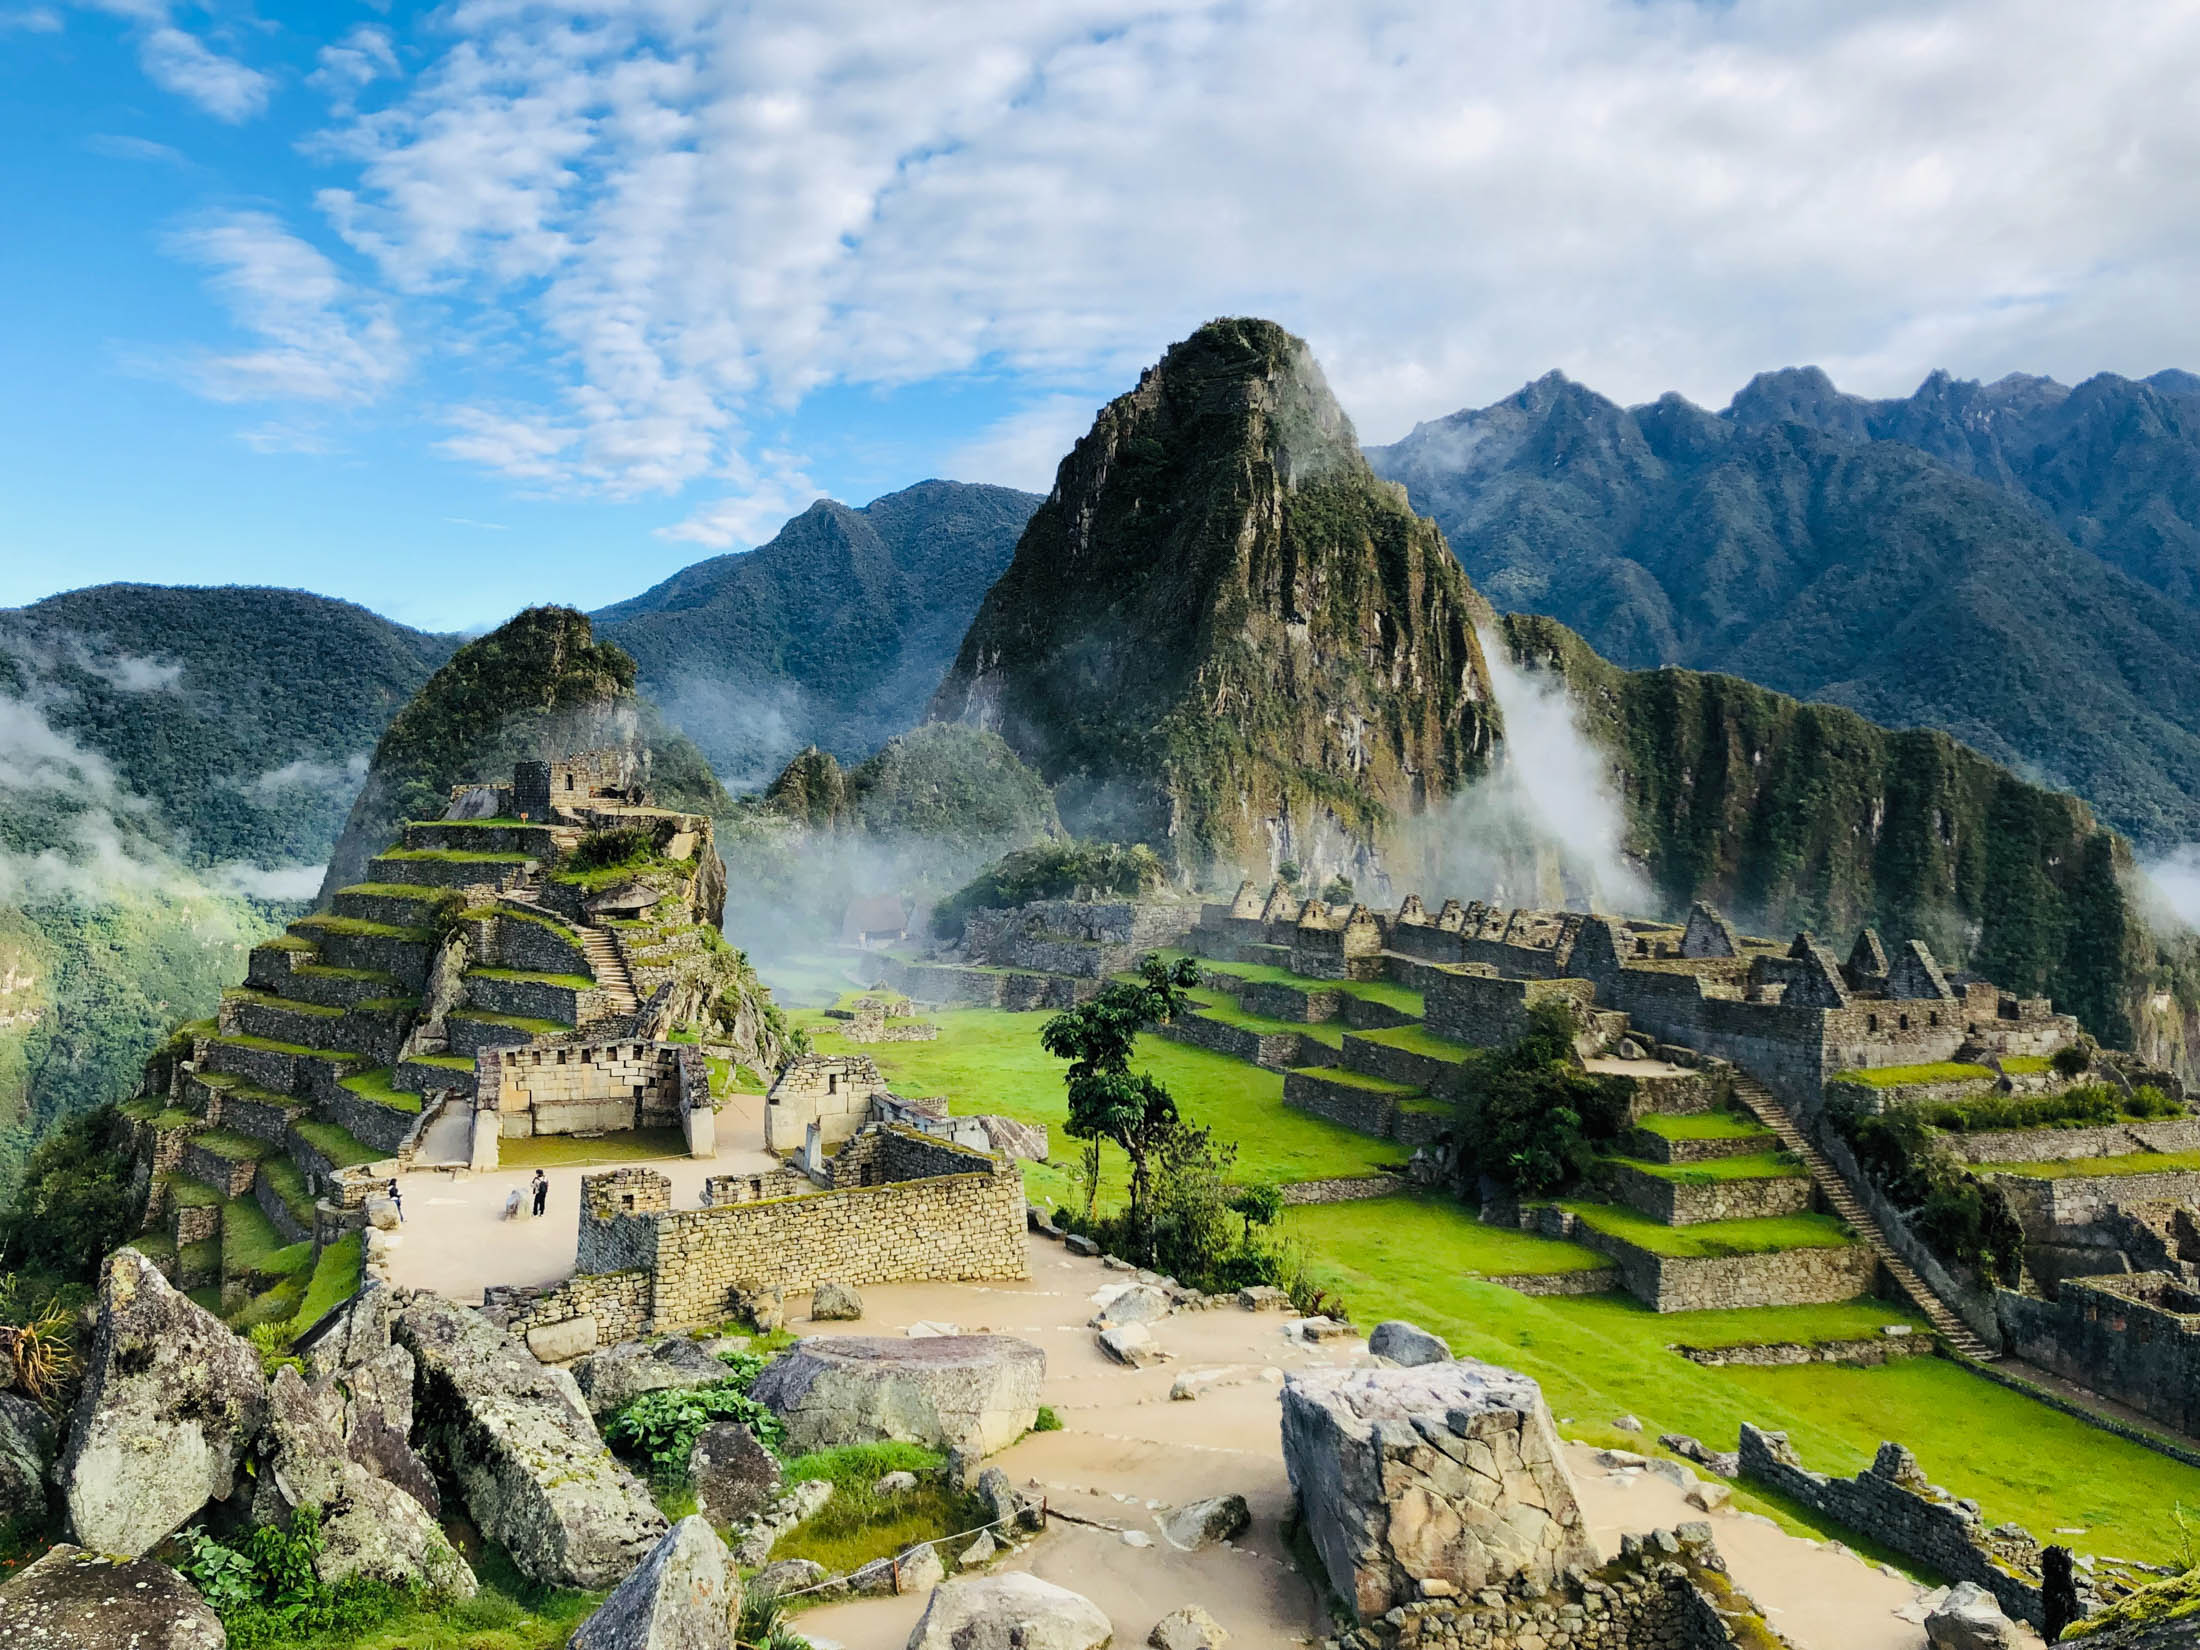 Huayna Picchu rises behind&nbsp;the Inca citadel of Machu Picchu in the early morning light.